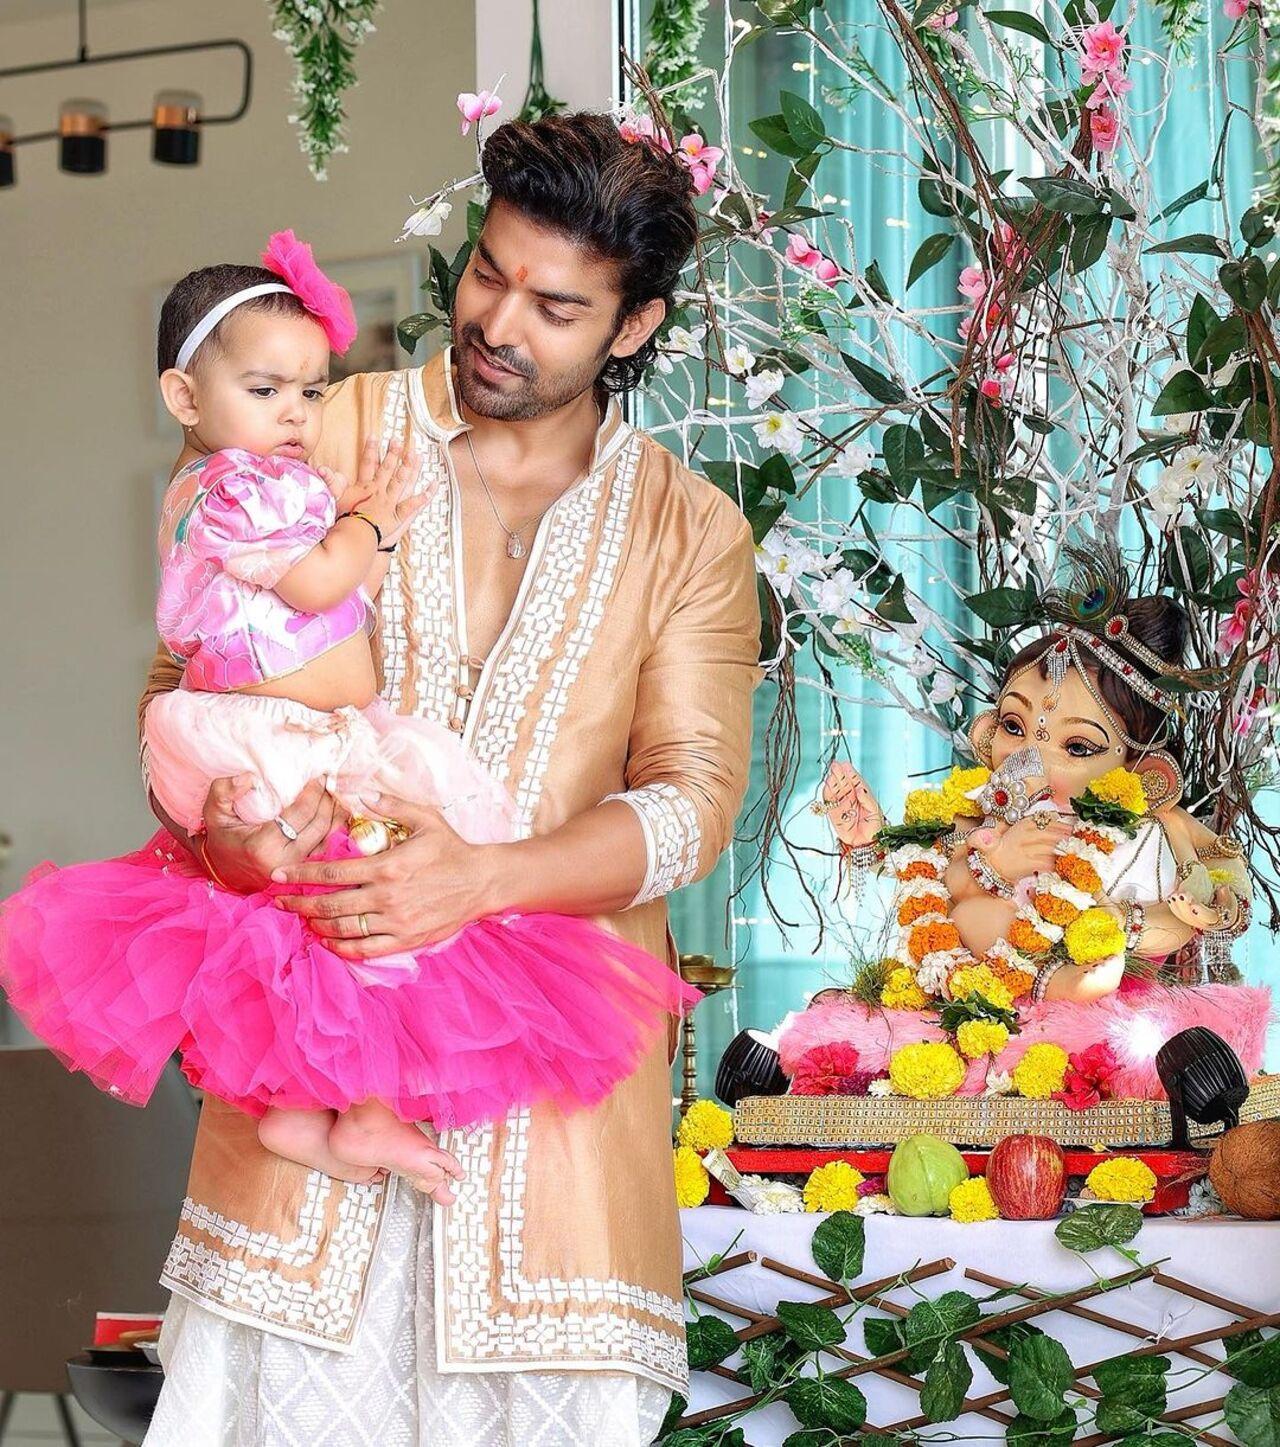 Gurmeet and Debina call Divisiha their miracle baby as she was born pre-mature fought her way through to them even as she was kept under NICU after birth. While Lianna was born through IVF, Divisha was a natural pregnancy